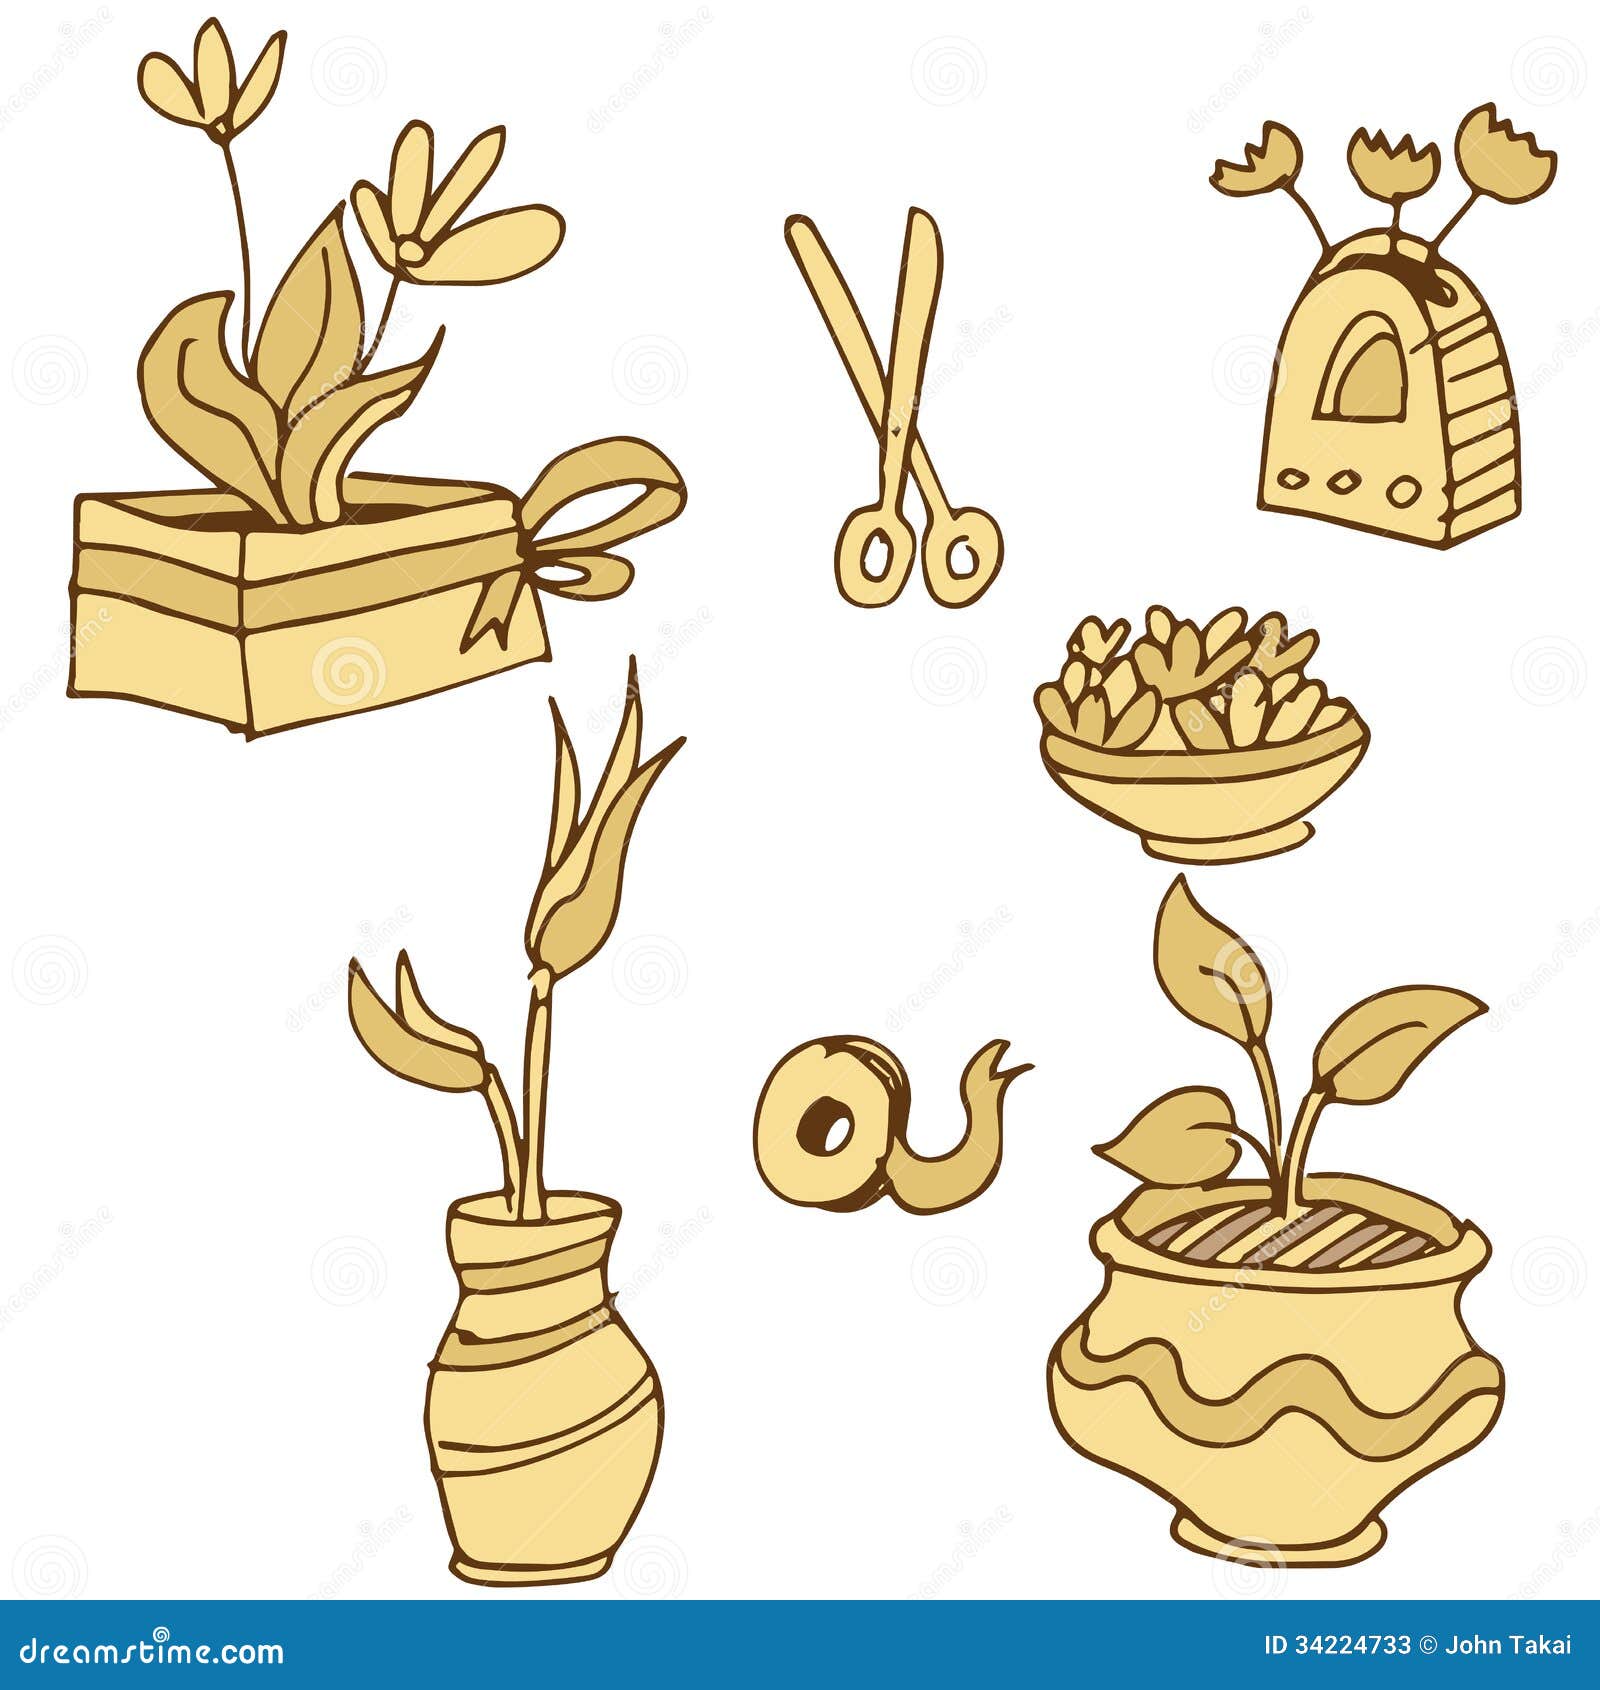 plant containers icon set